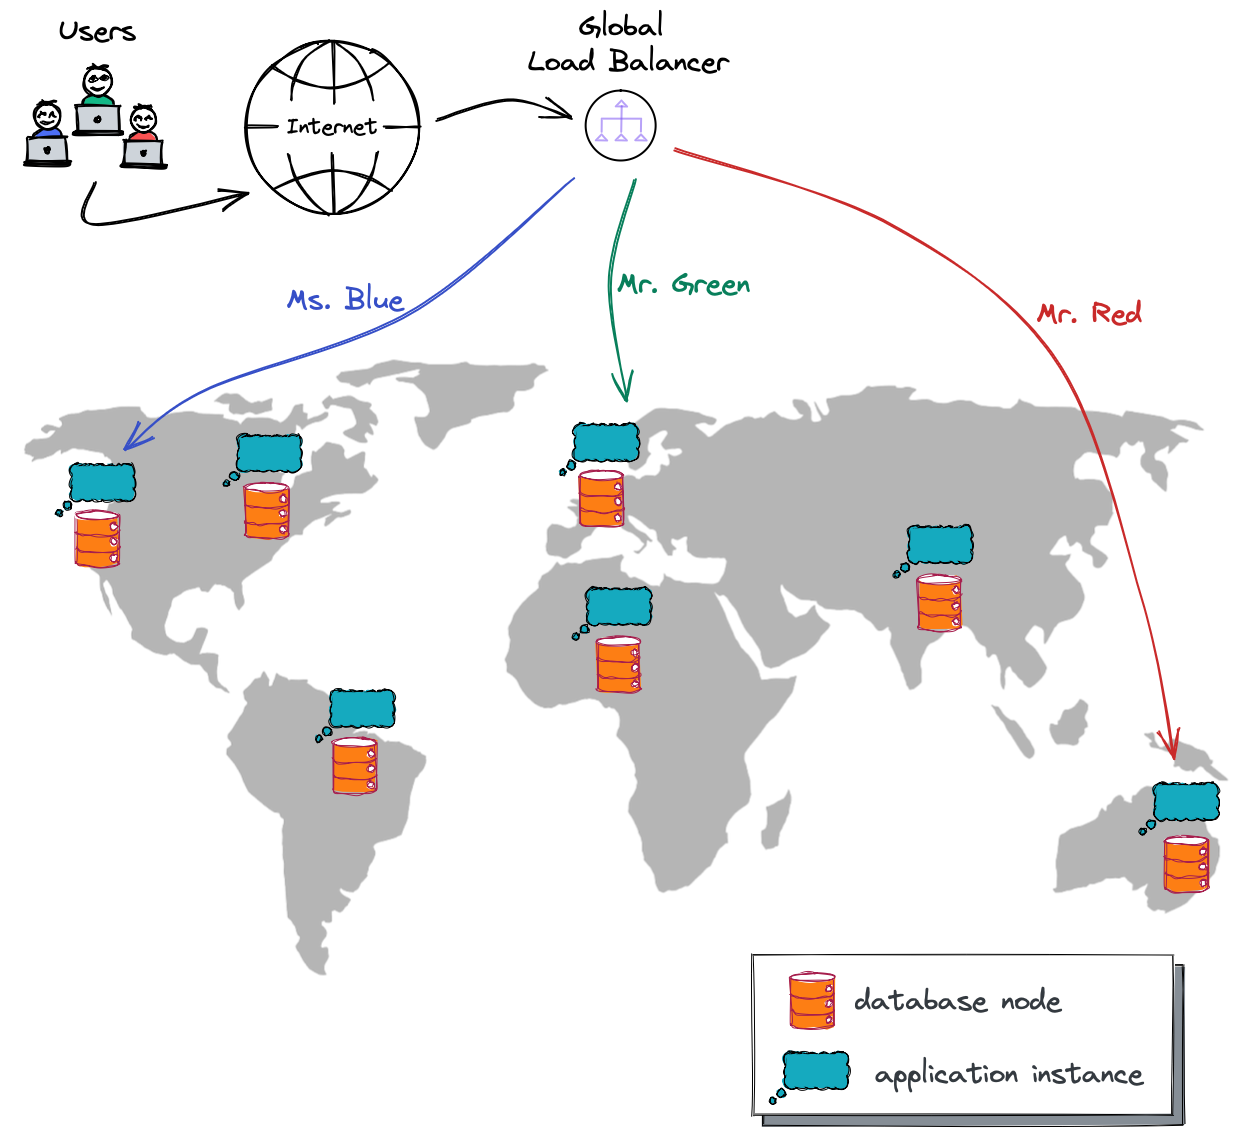 World map showing database node and application instance